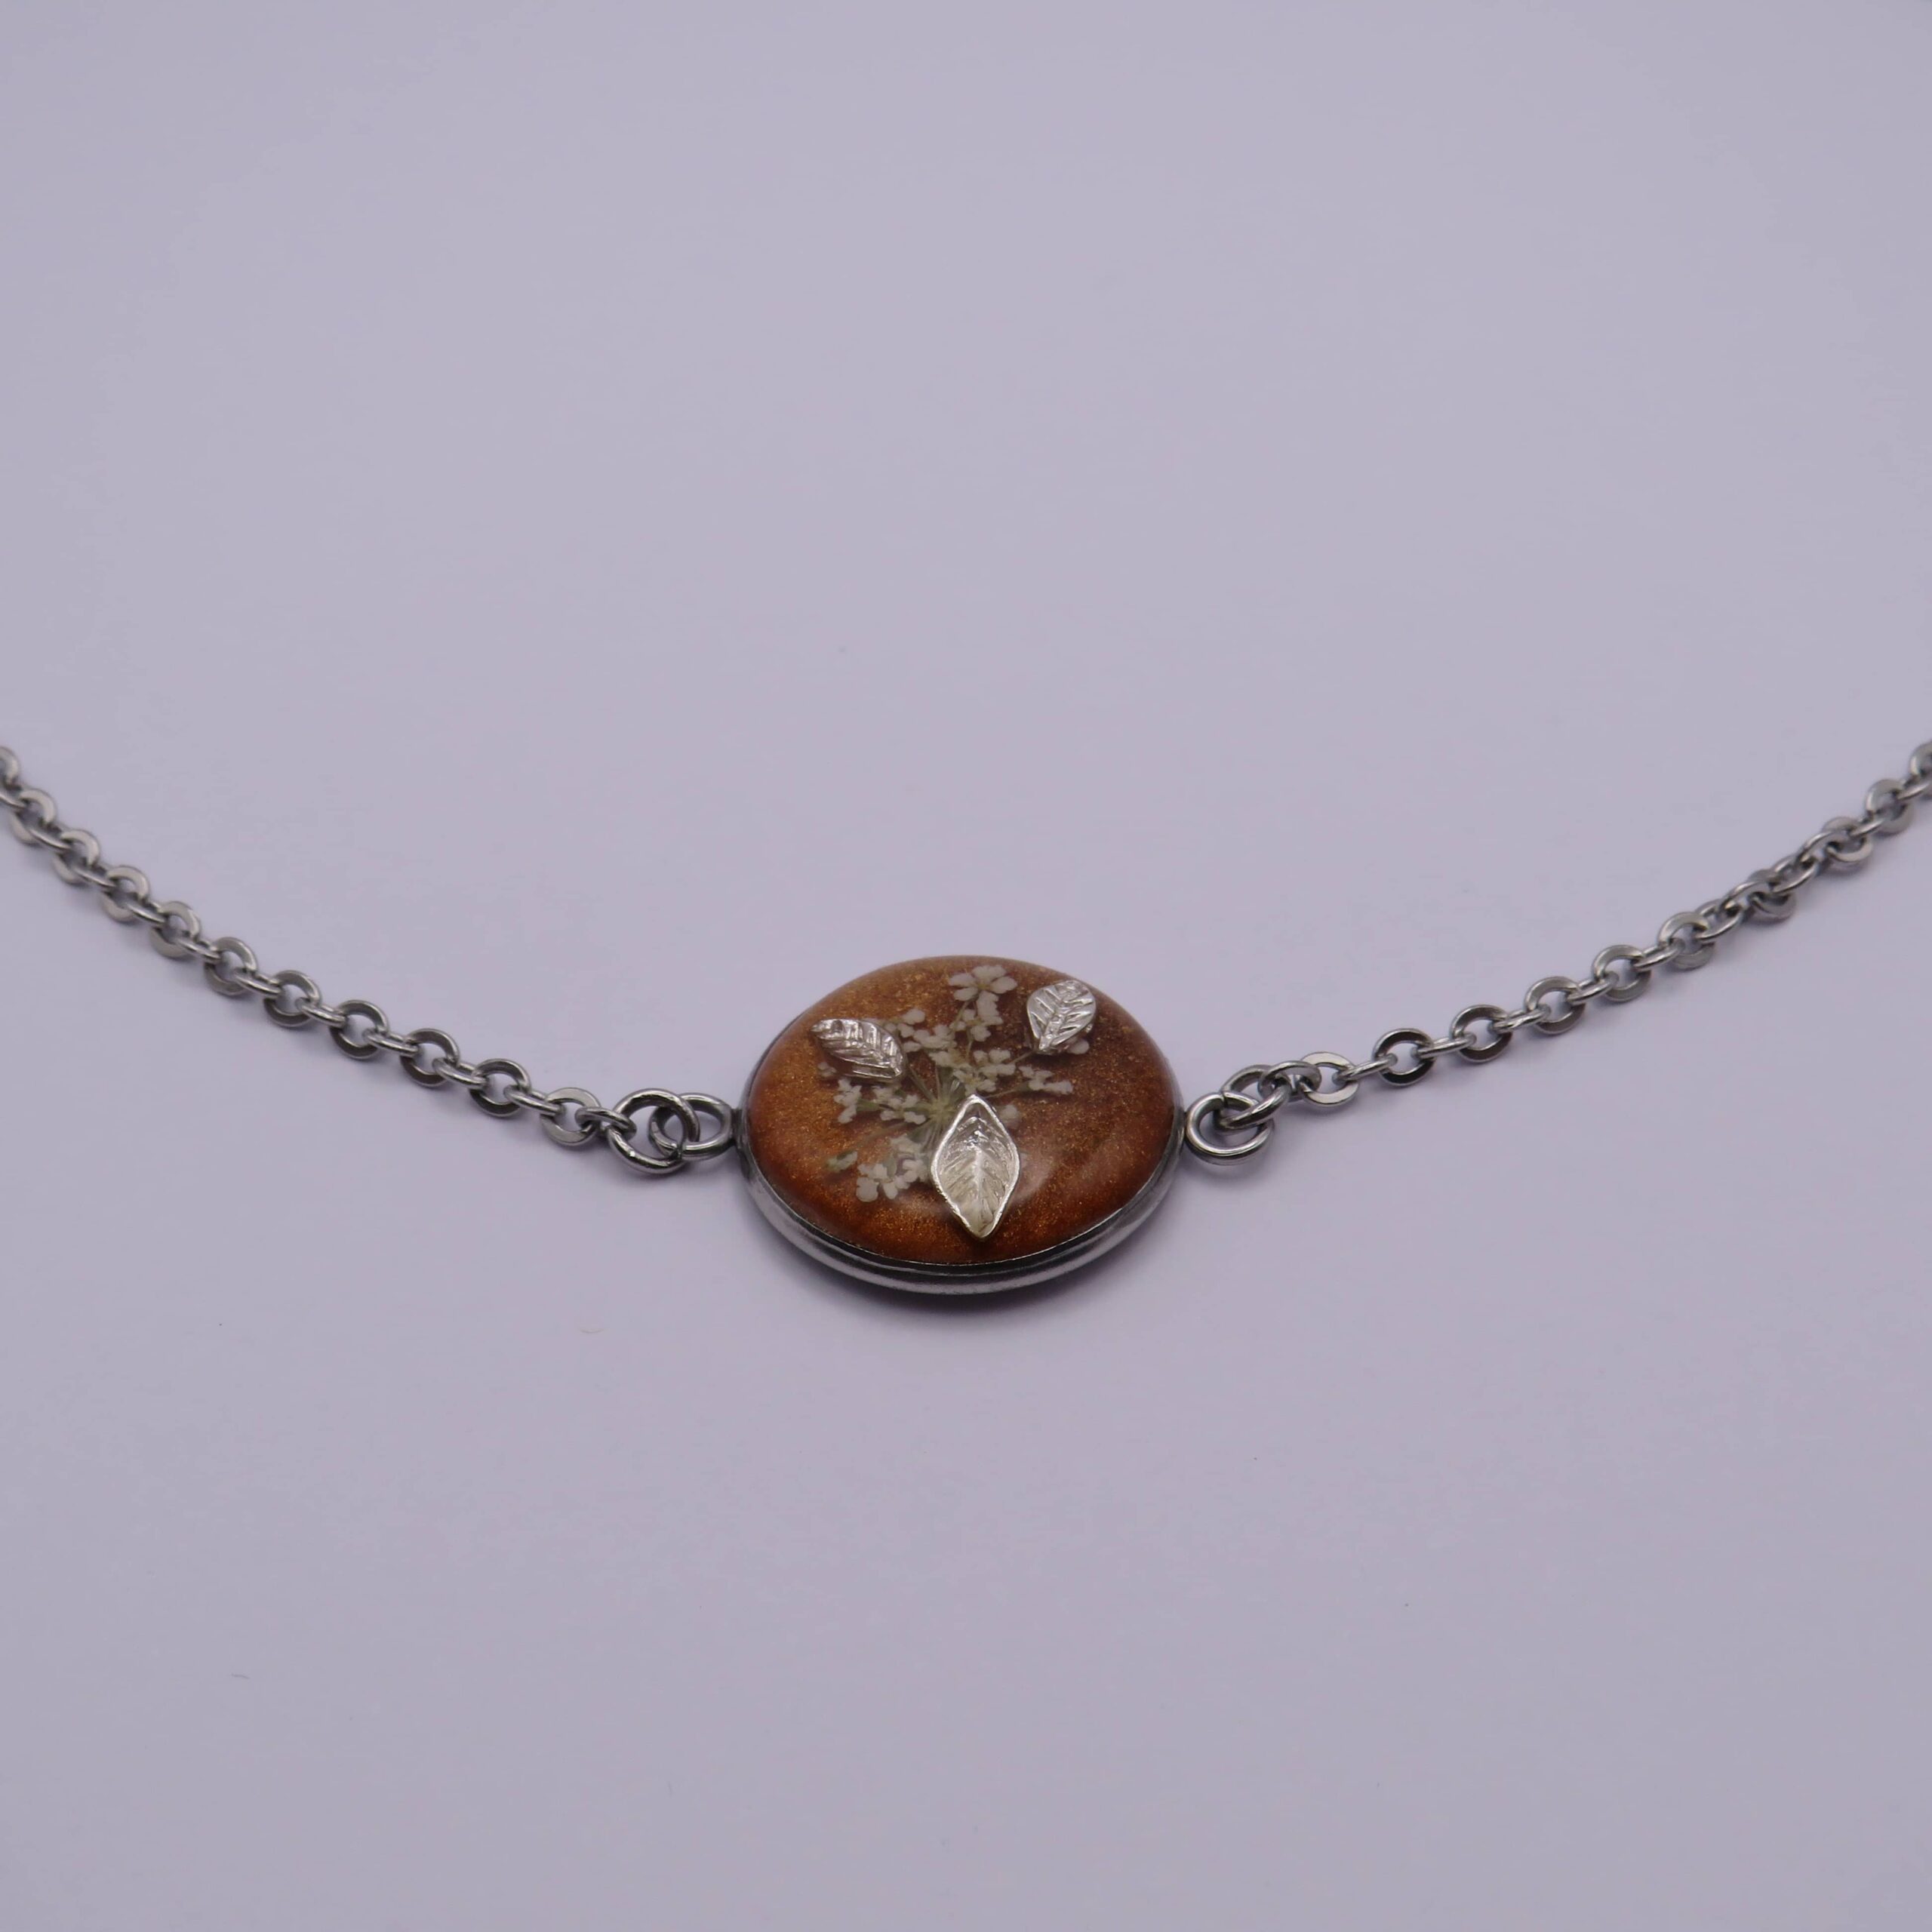 Stainless Steel Brown Flower & Leaves Pendant Necklace